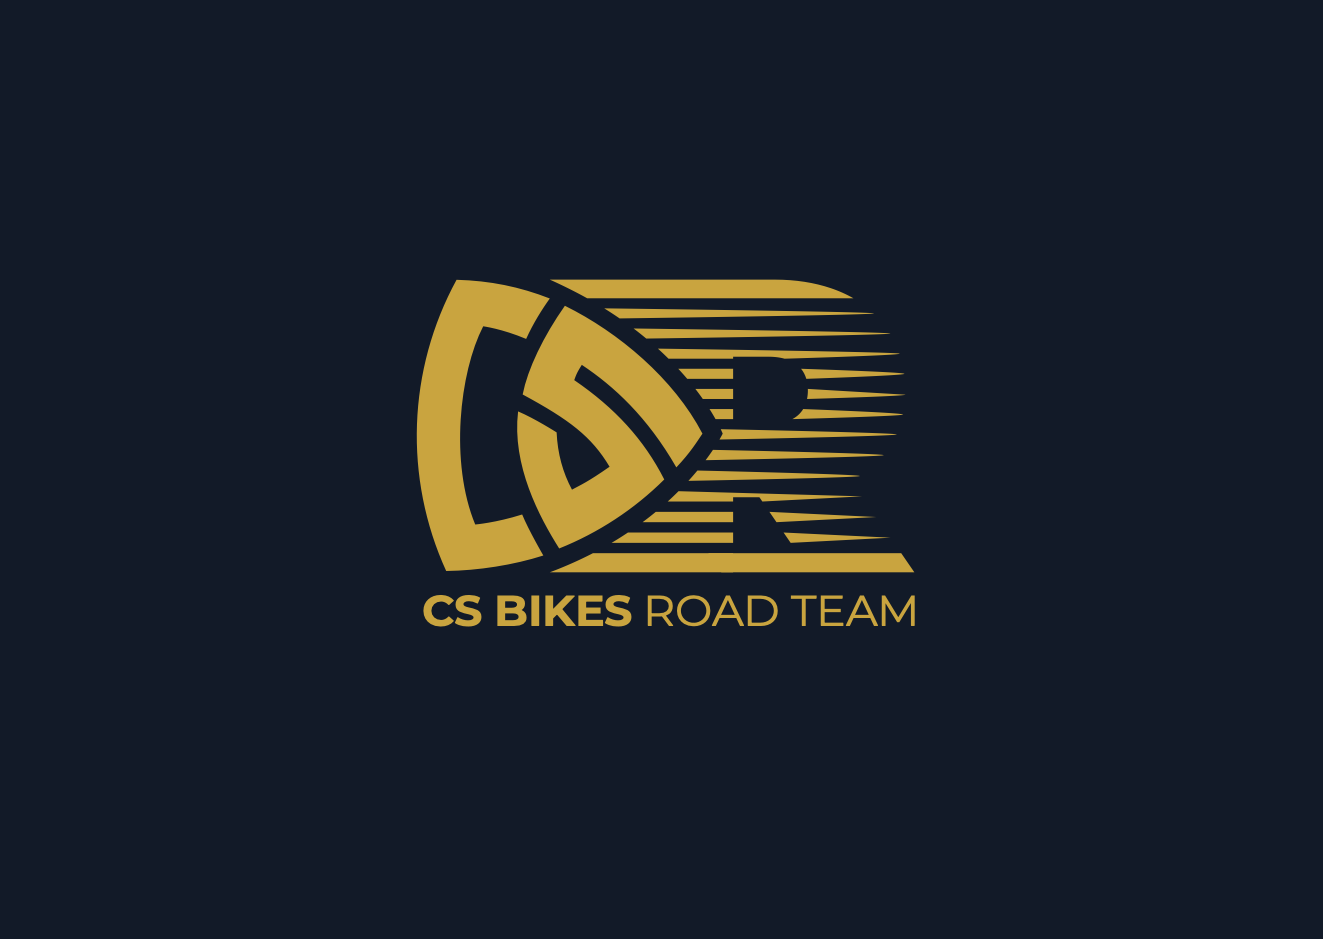 The CSBIKES ROAD TEAM embodies our passion for racing.
Find out everything about the latest developments, victories and stories about our CSBIKES ROAD TEAM. Always stay up to date with our latest blog posts.